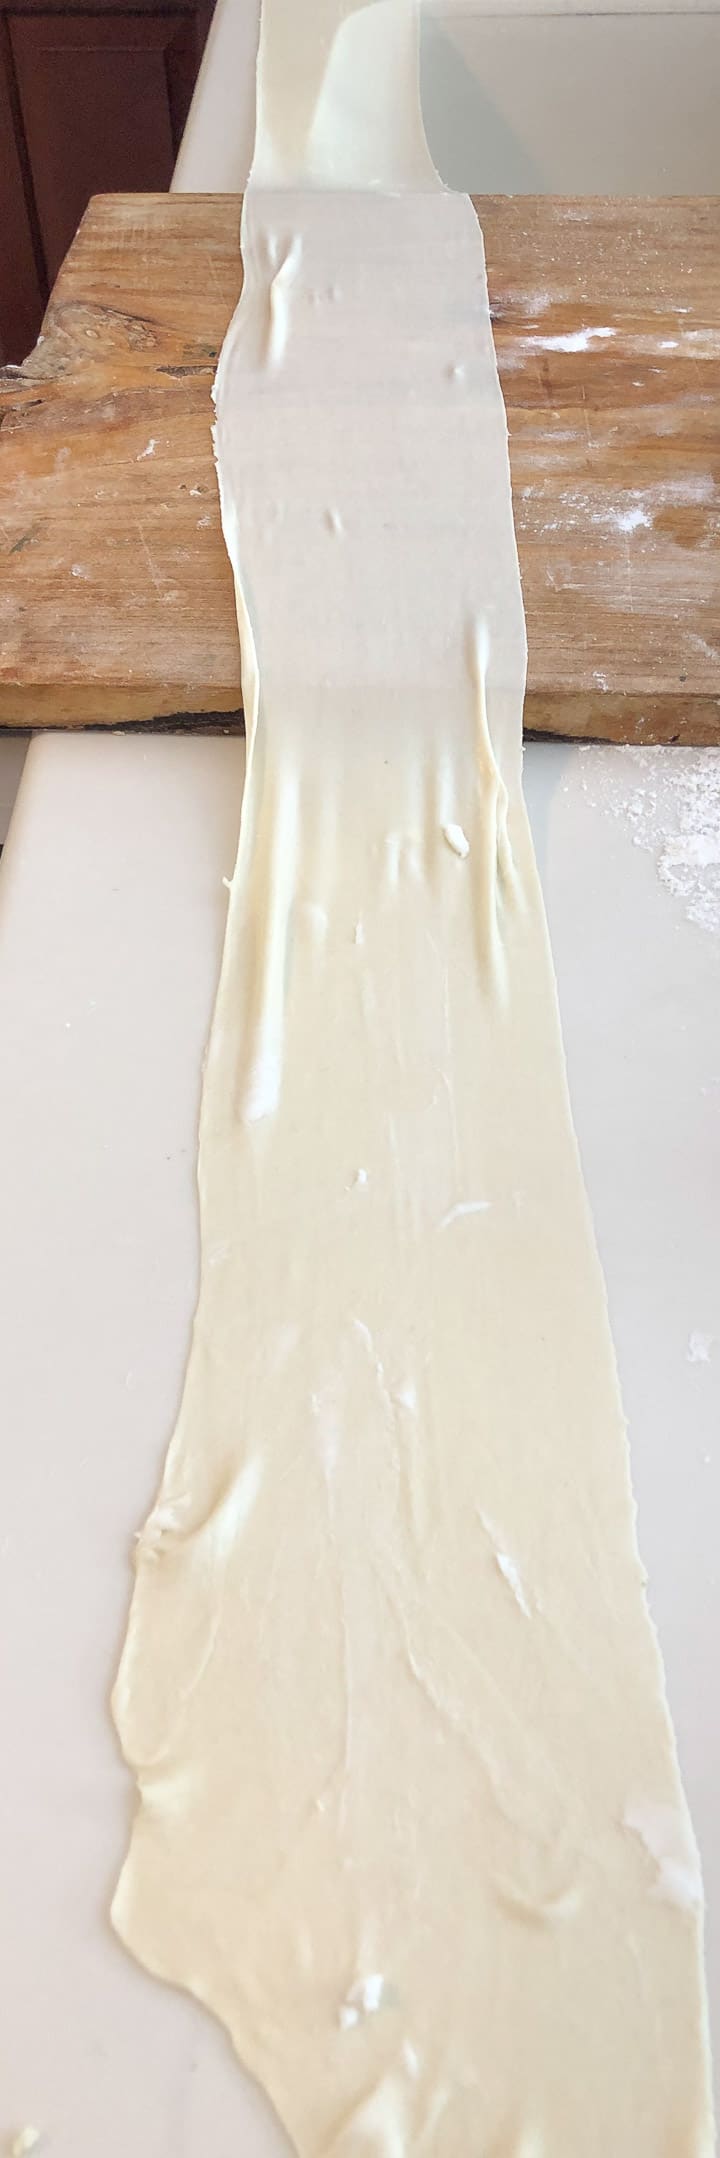 A very long and very thin strip of dough after passing through pasta machine. 